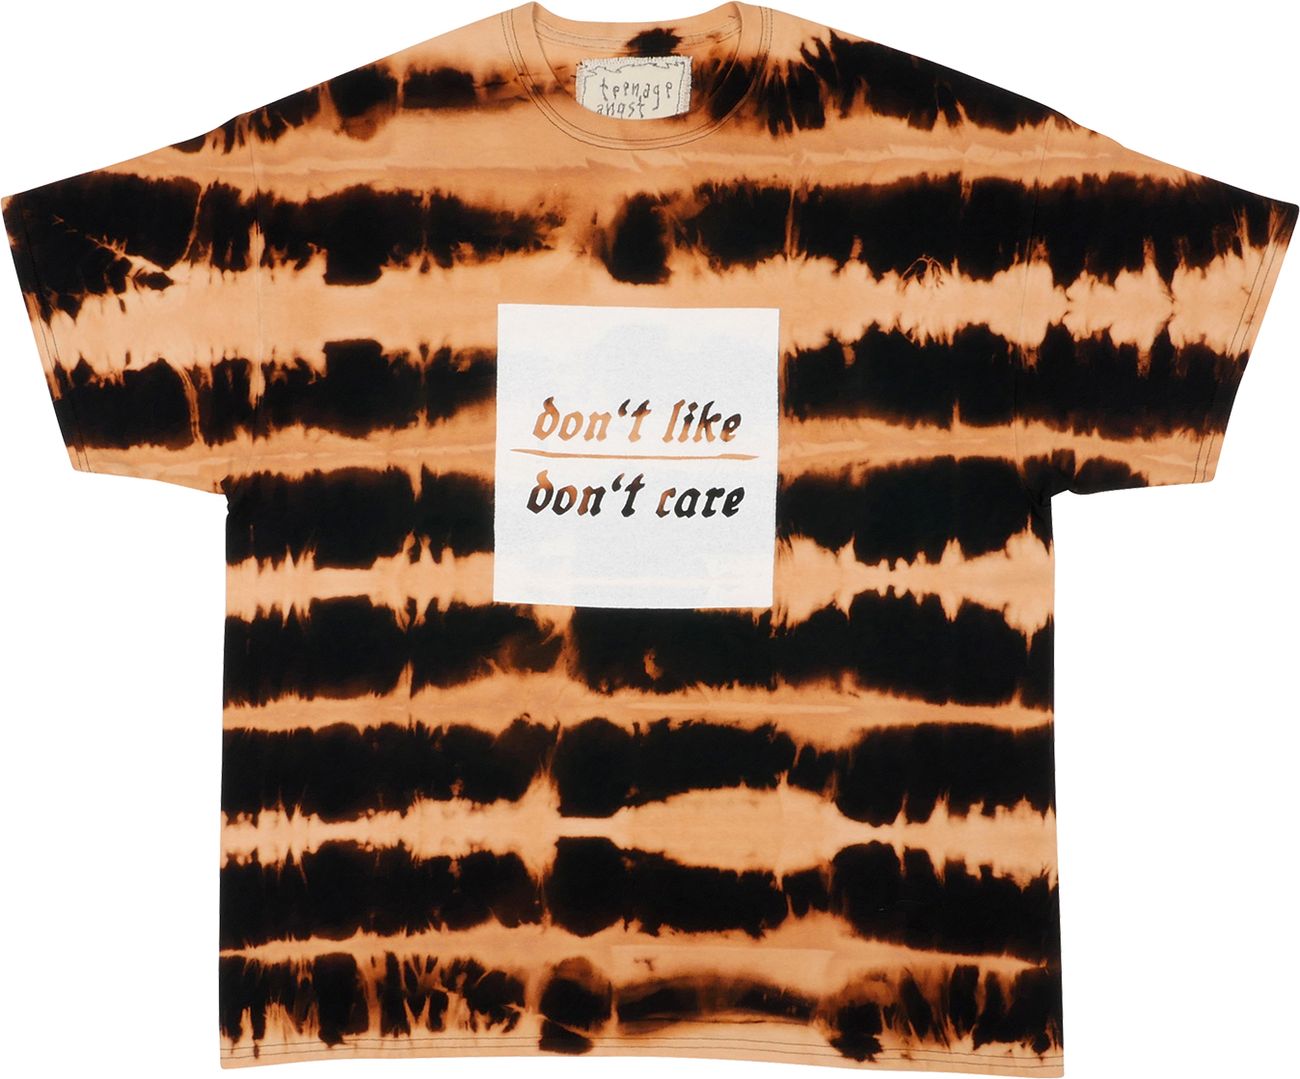 Teenage Angst "Don't like, don't care" T-Shirt - tie bleach horizontal